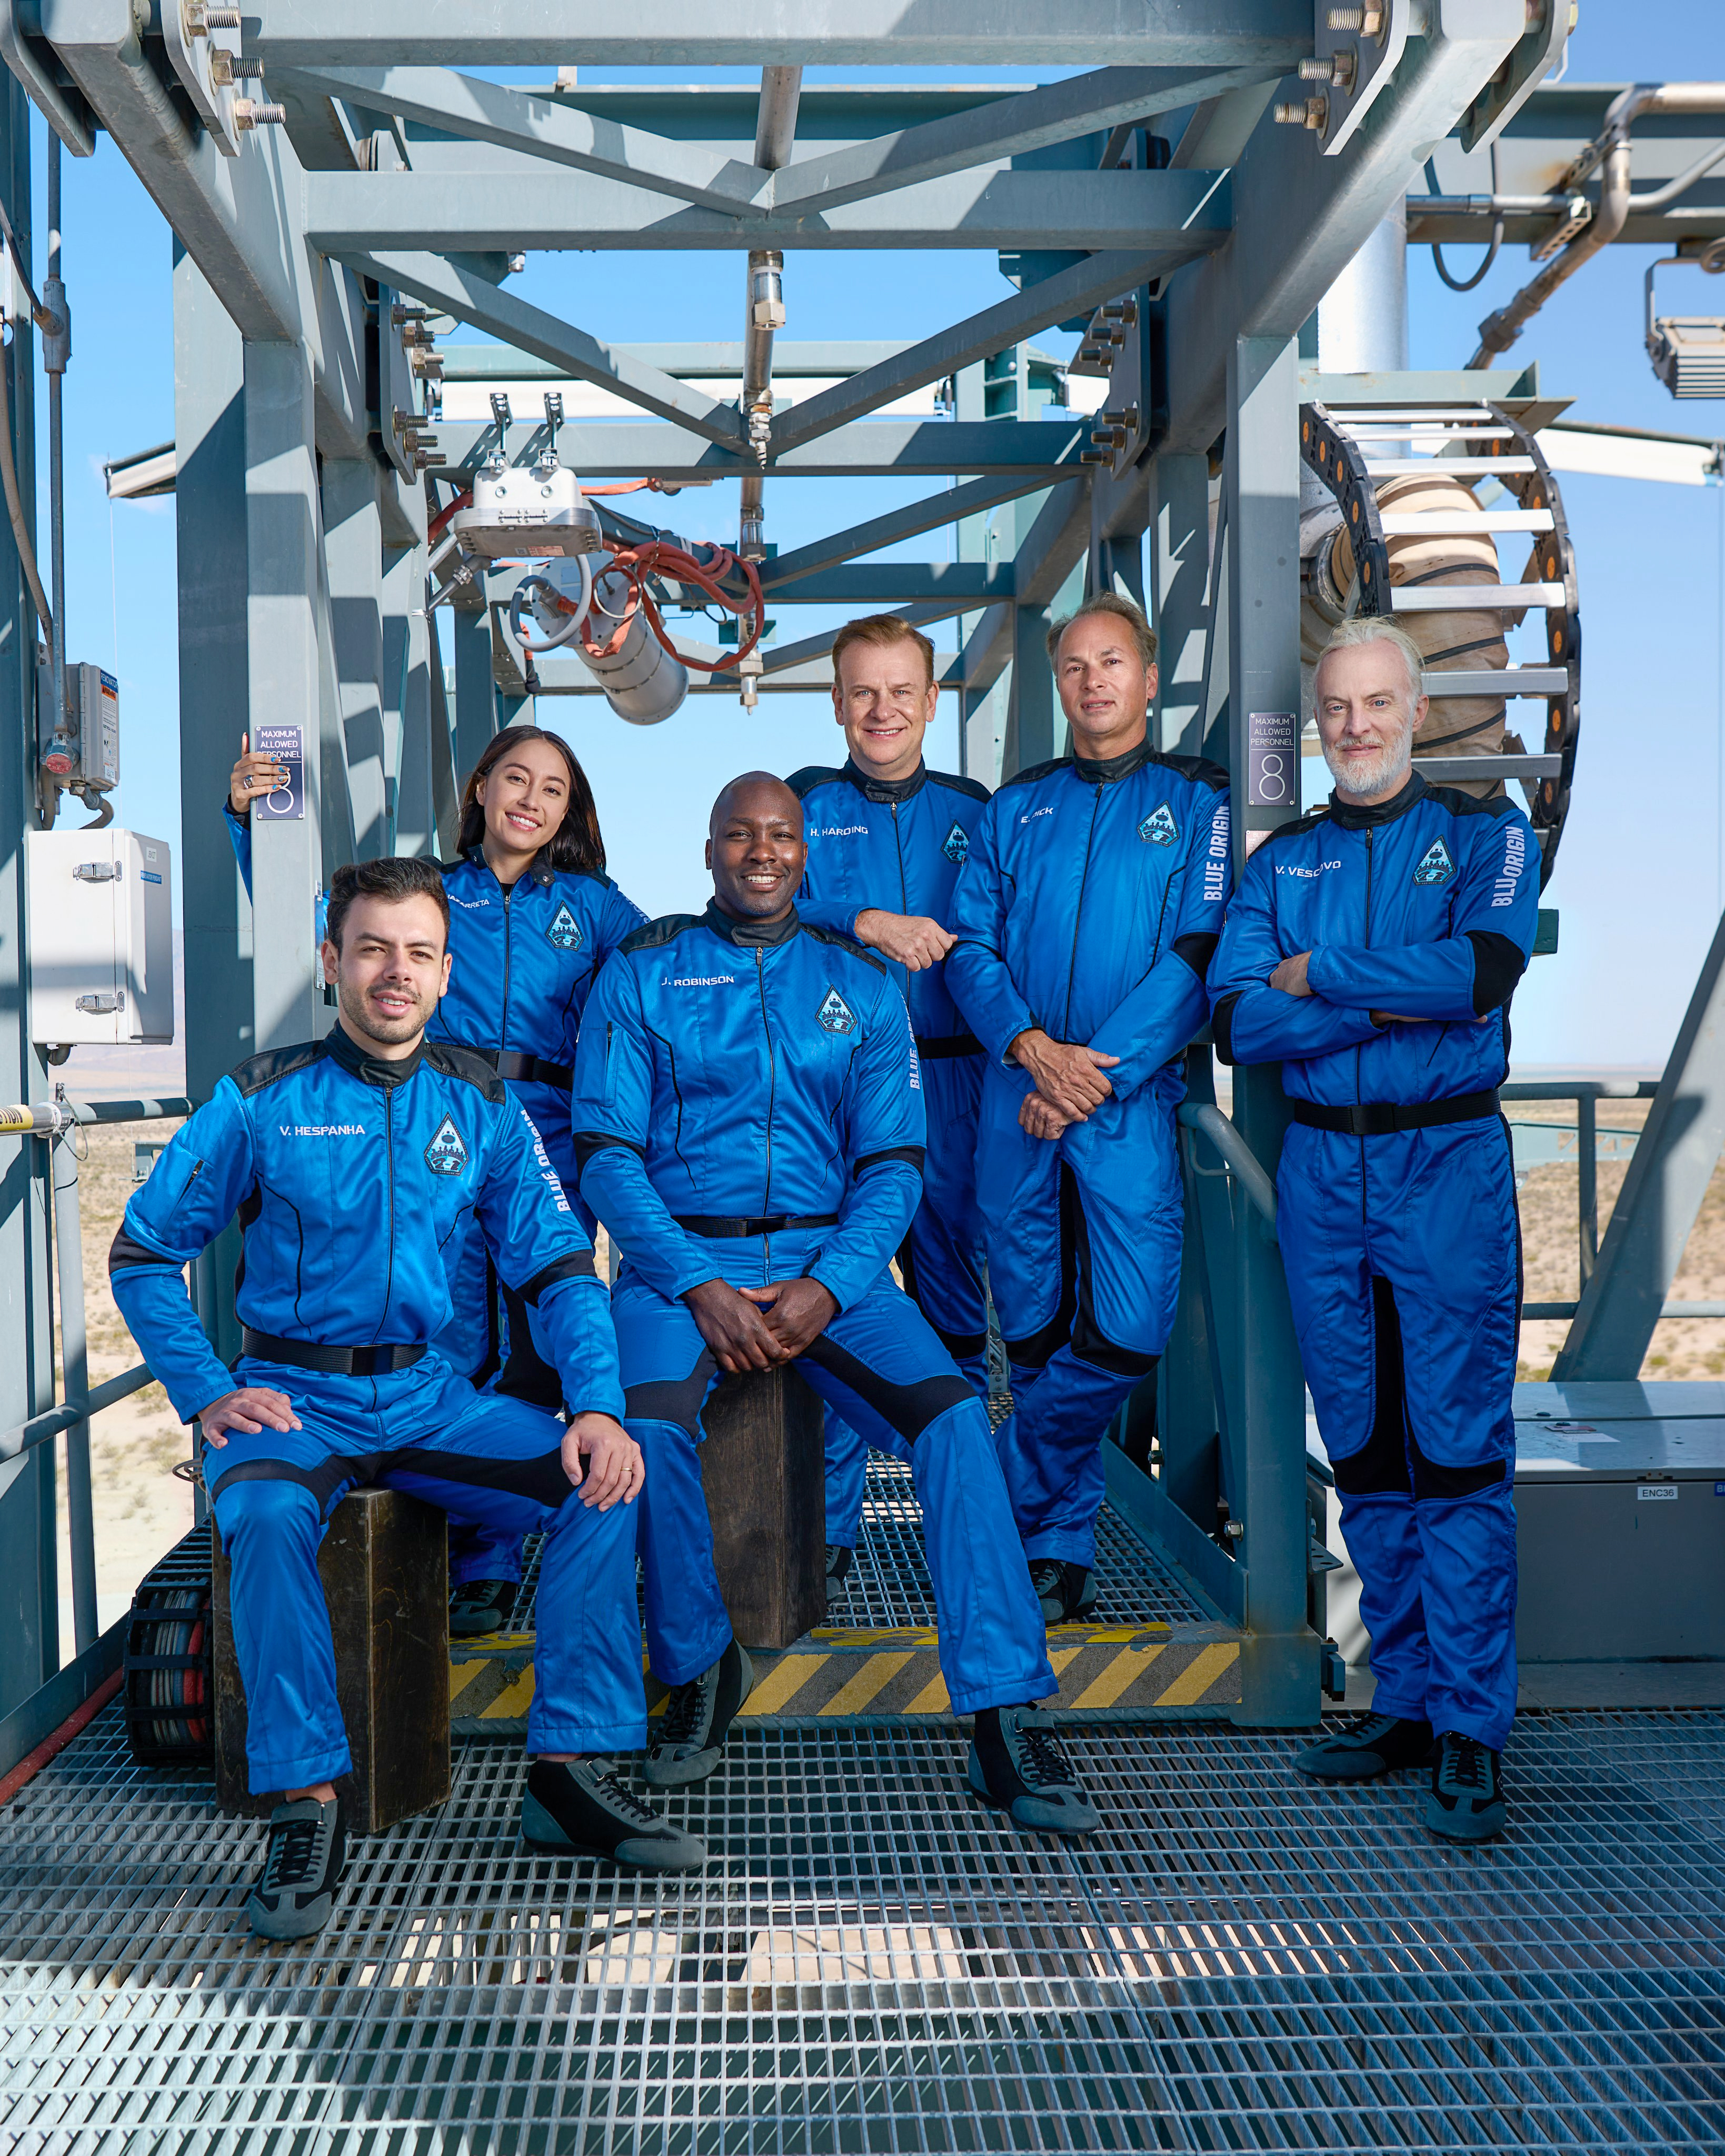 Blue Origin's New Shepard NS-21 crew pose for a photo on the gantry at the company's West Texas Launch Site One. From left to right: Victor Correa Hespanha, Katya Echazarreta, Jaison Robinson, Hamish Harding, Evan Dick and Victor Vescovo.